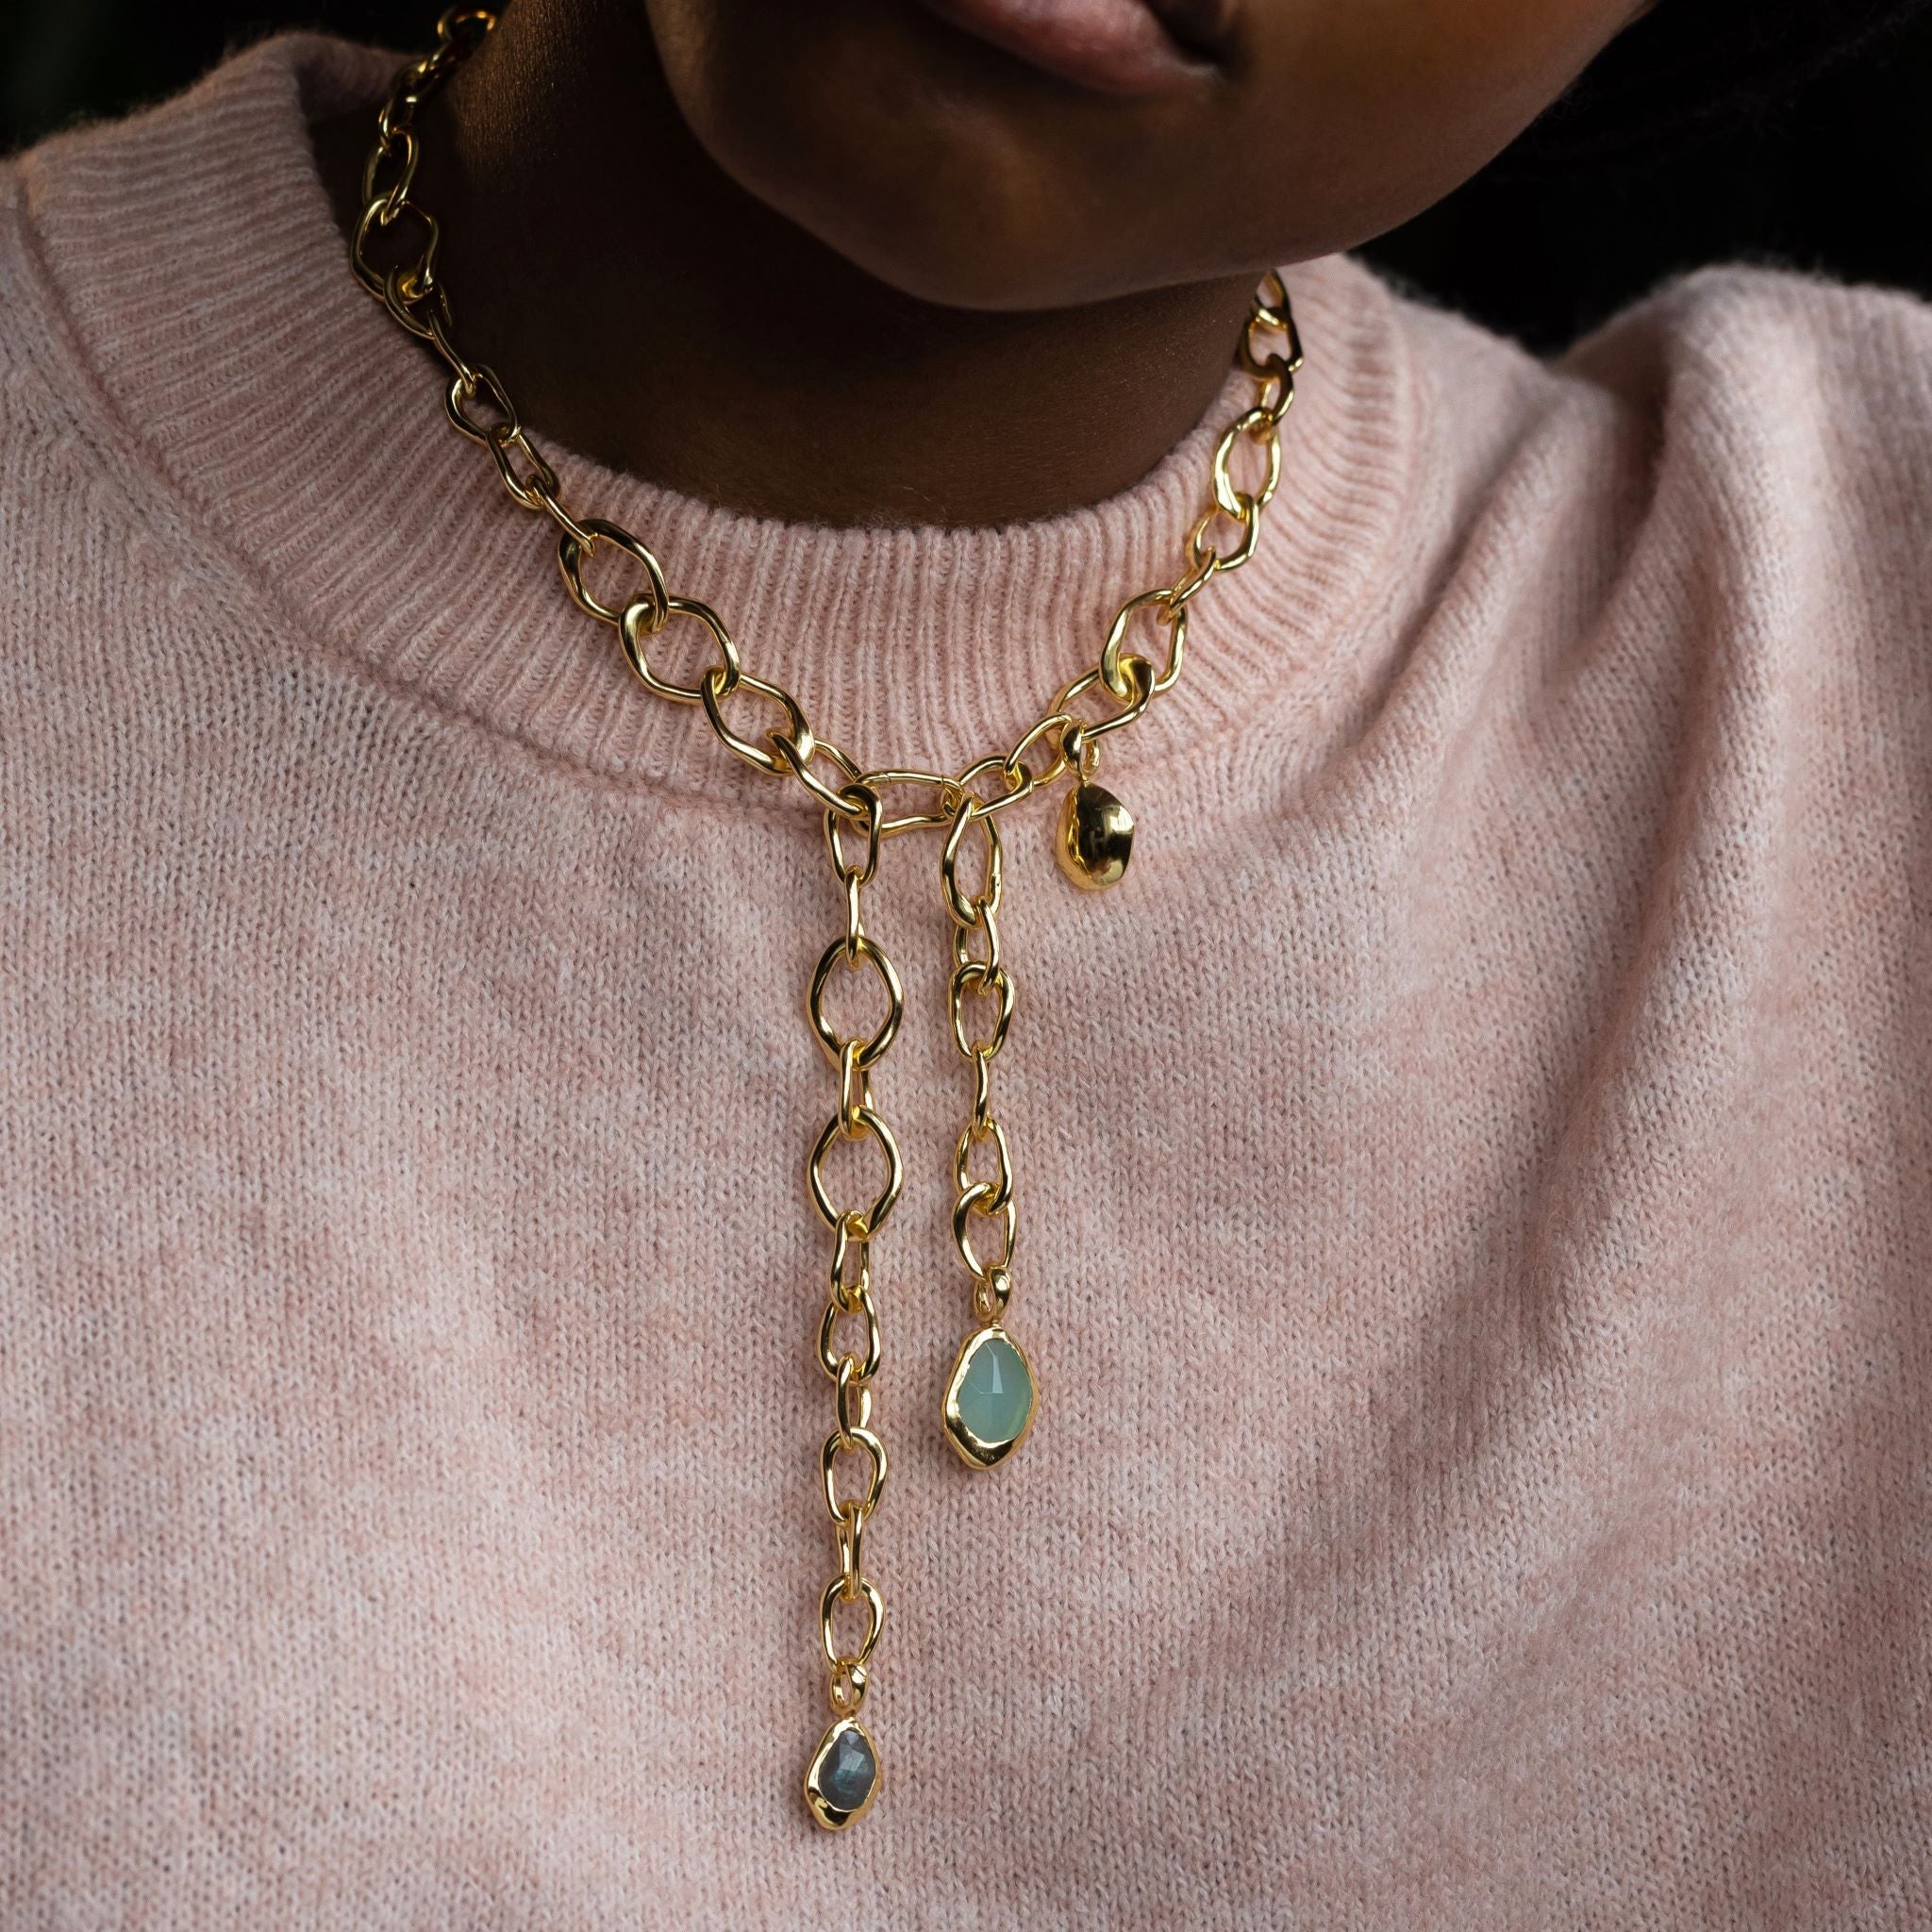 Chain features a handcut natural ripple shape and is crafted from sterling silver or 18ct gold vermeil.